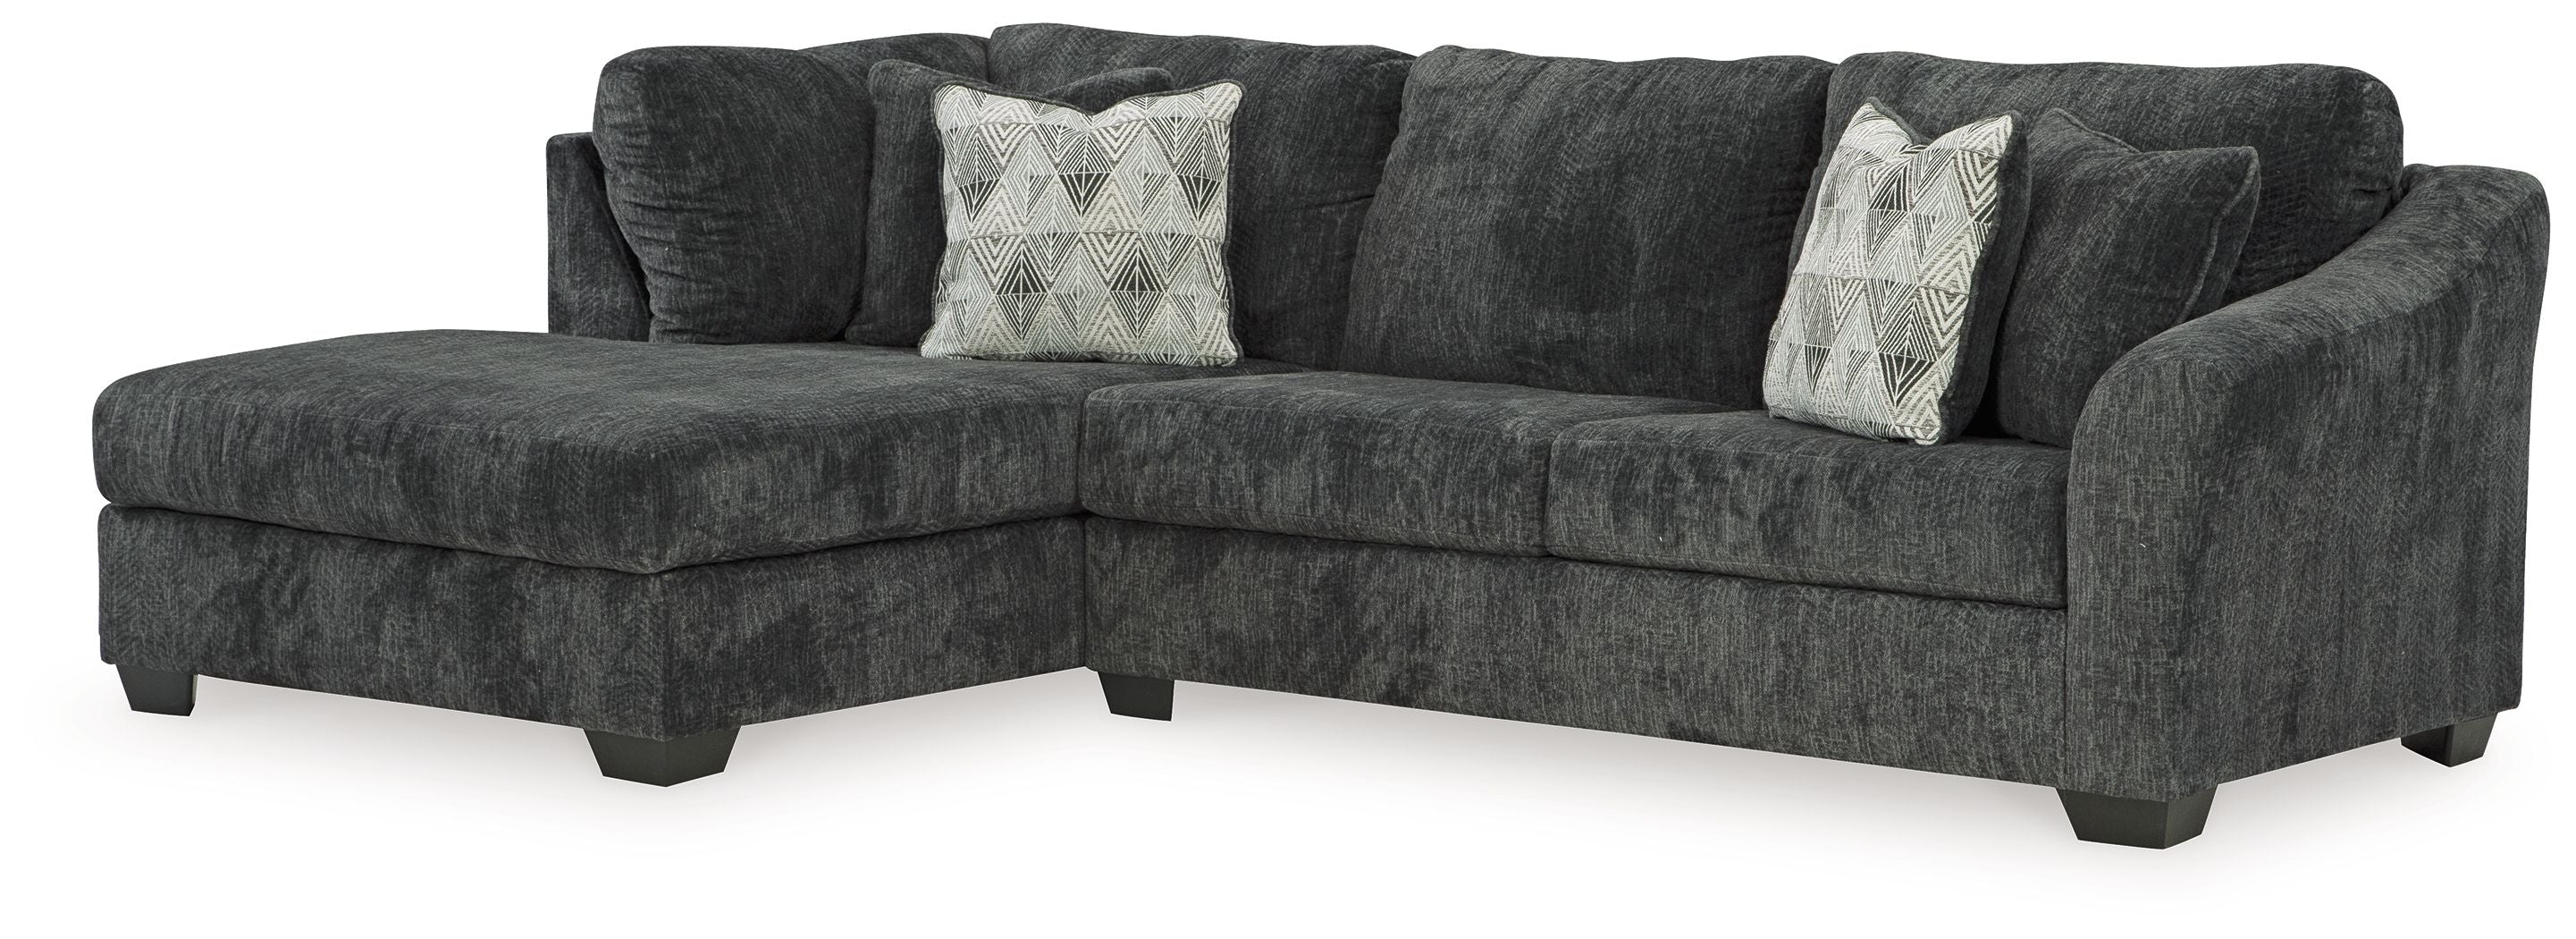 Biddeford Dark Gray 2-Piece L Shaped Sectional-Stationary Sectionals-American Furniture Outlet